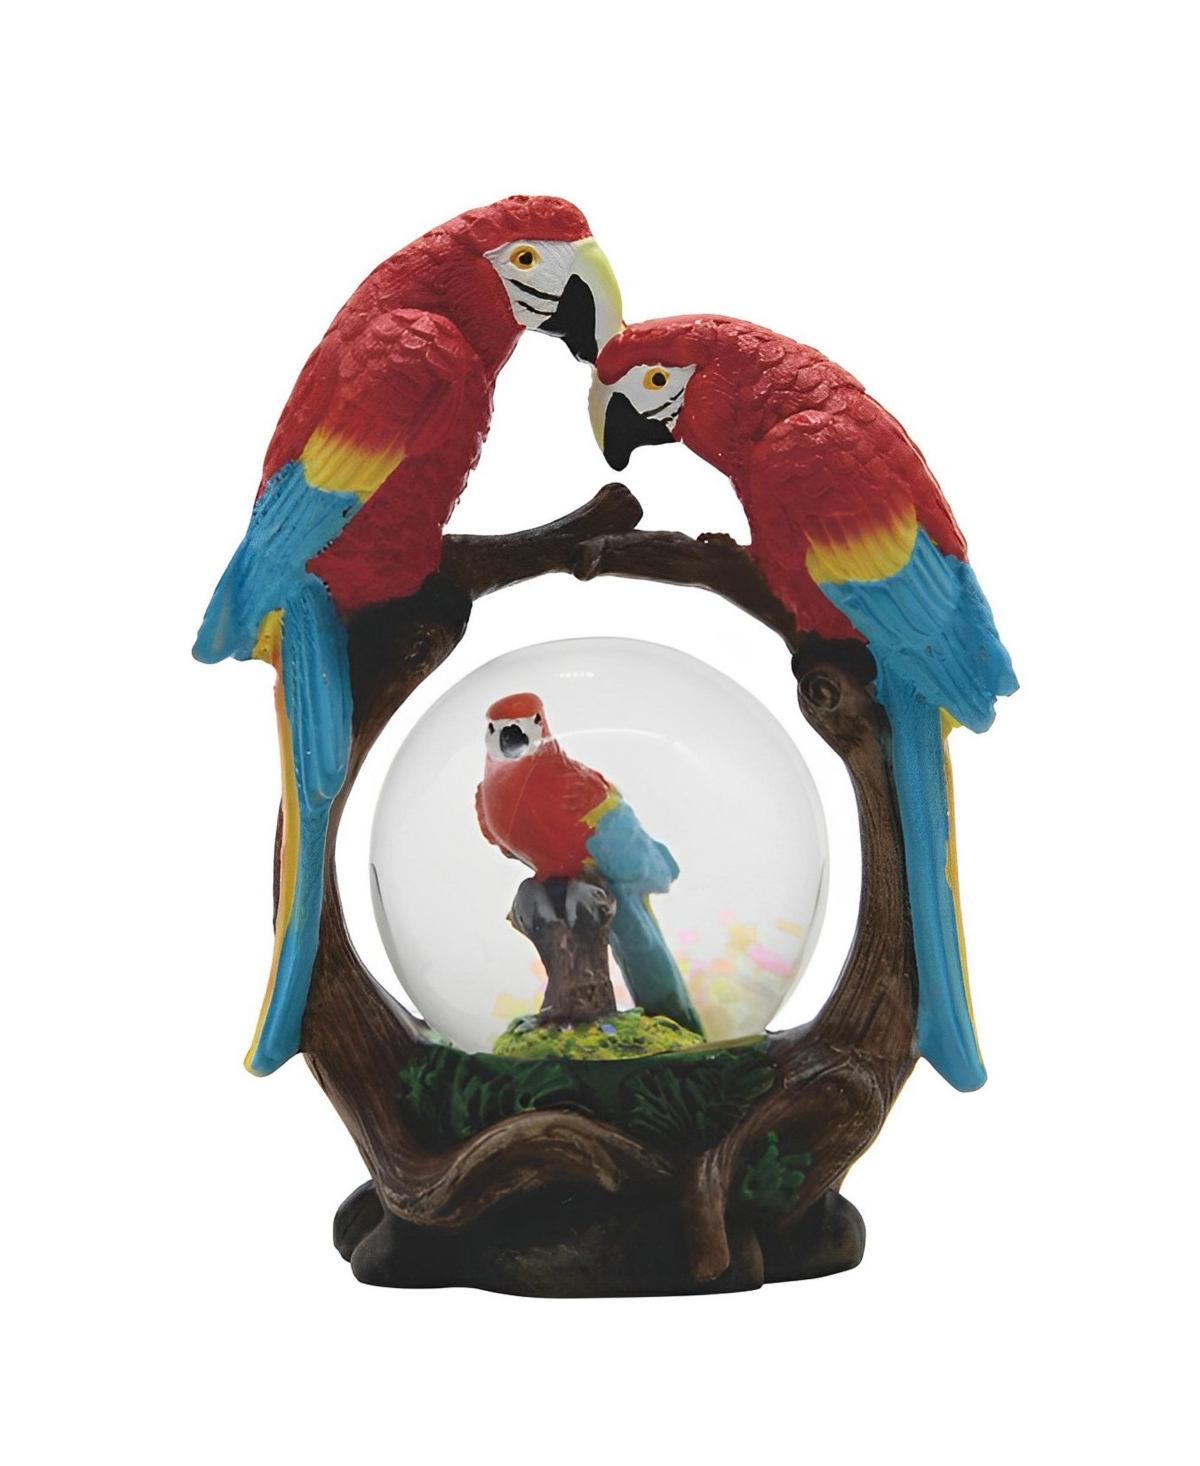 4.25"H Lovely Red Parrots Family Glitter Snow Globe Figurine Home Decor Perfect Gift for House Warming, Holidays and Birthdays - Multicolor